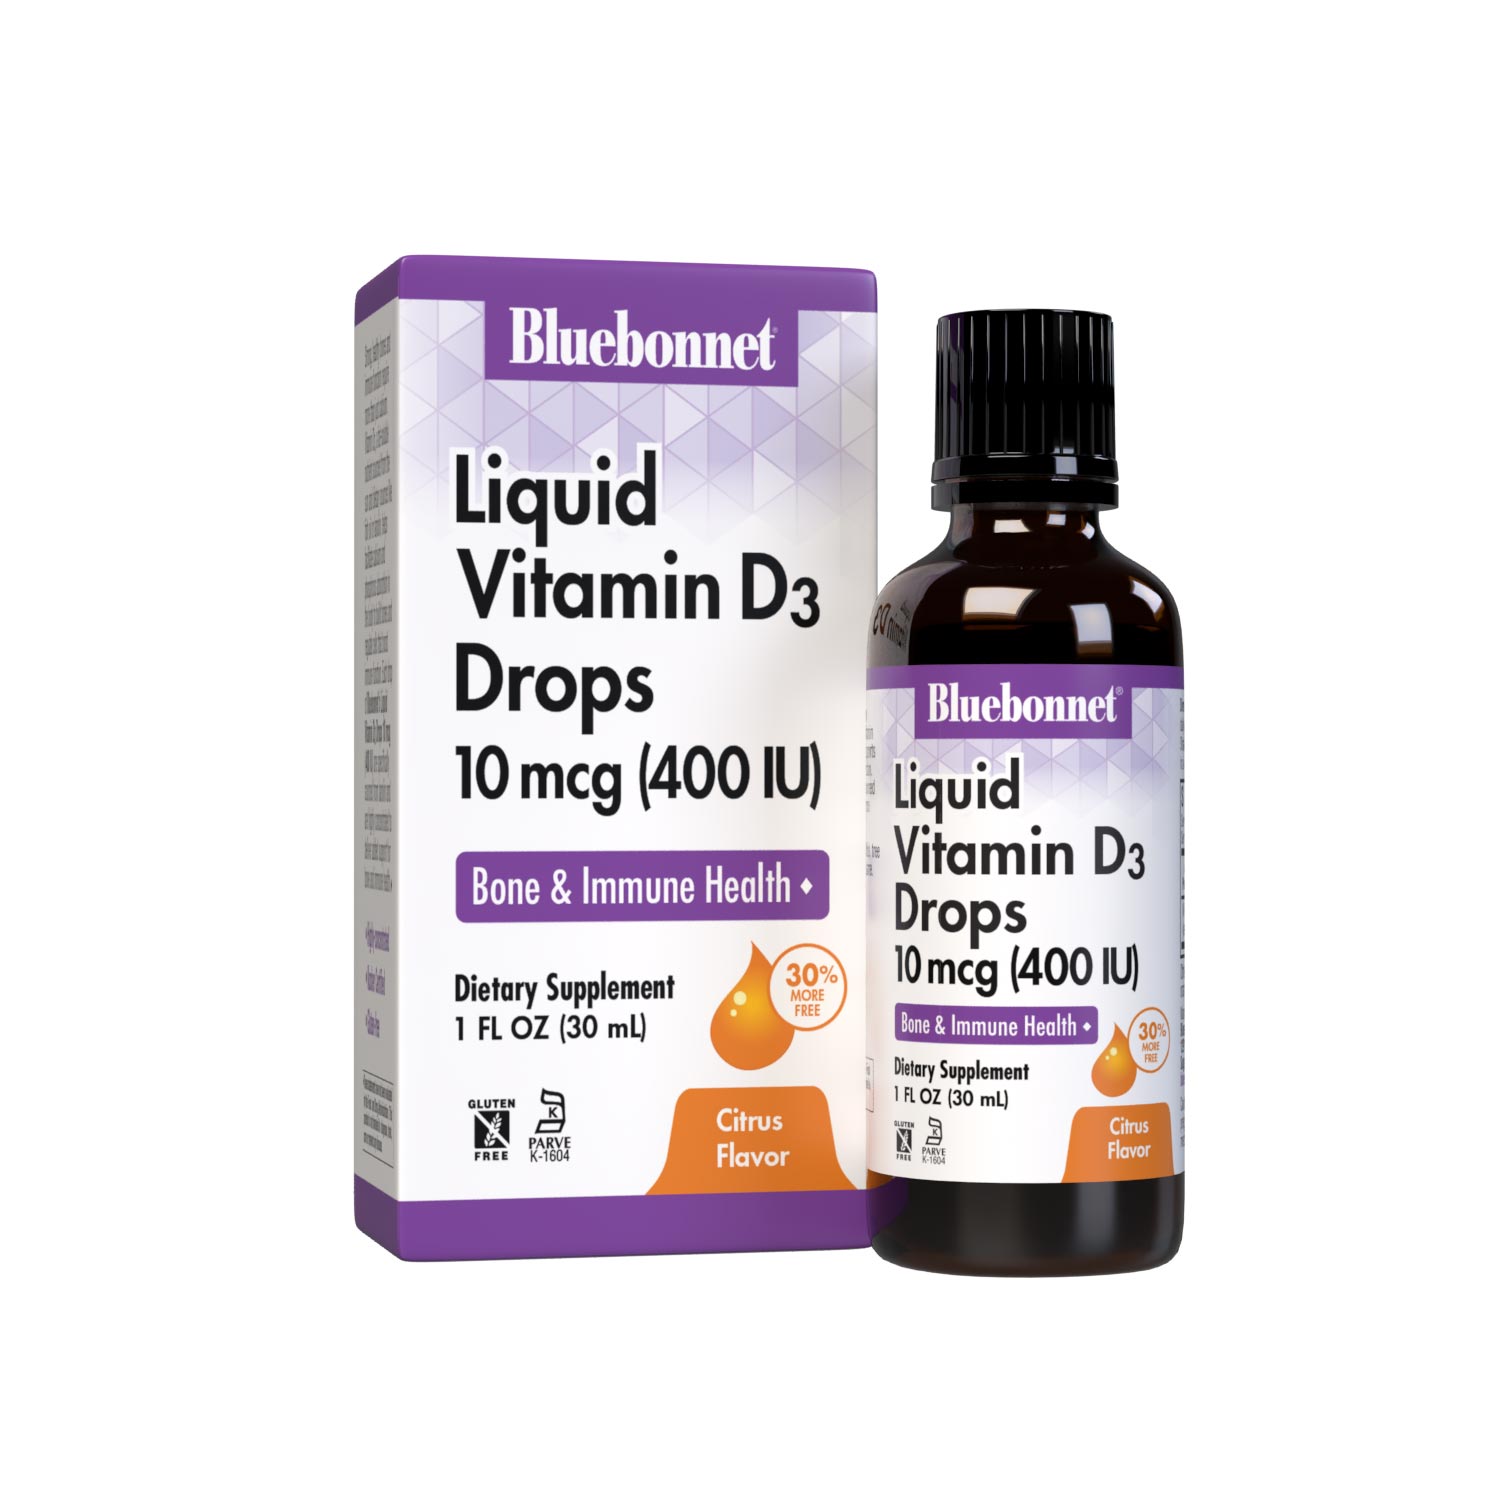 Bluebonnet’s Liquid Vitamin D3 Drops 400 IU (10 mcg) are formulated with vitamin D3 (cholecalciferol) from lanolin for strong healthy bones. Each drop of this sunshine vitamin is flavored using a hint of orange and lemon essential oils. bottle with box. #size_1 fl oz